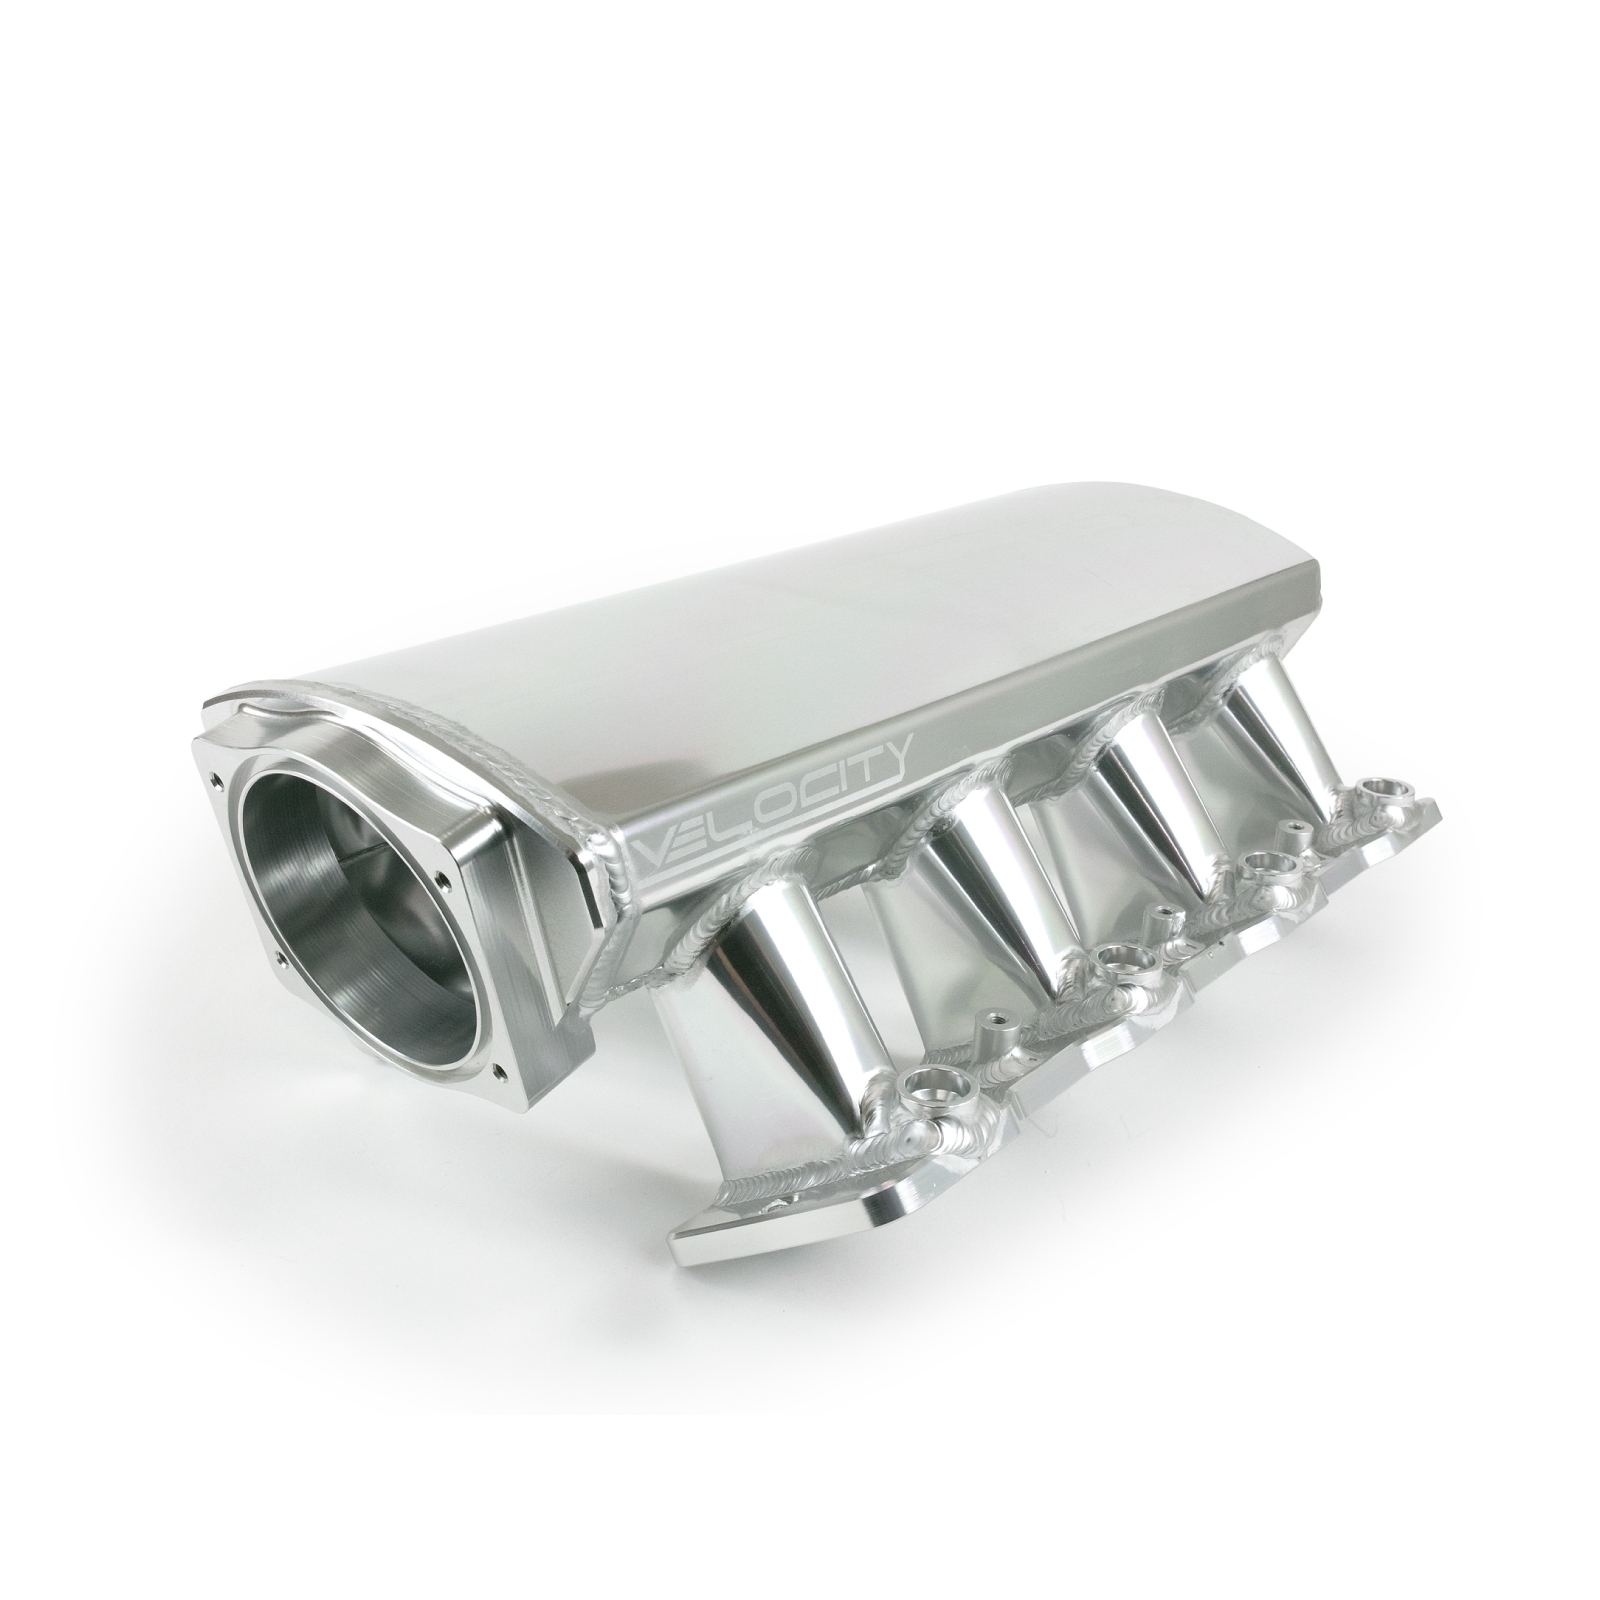 GM LS1/LS2/LS6 Cathedral Port Angled Low Profile Clear Anodized TSP Velocity Fabricated Aluminum Intake Manifold